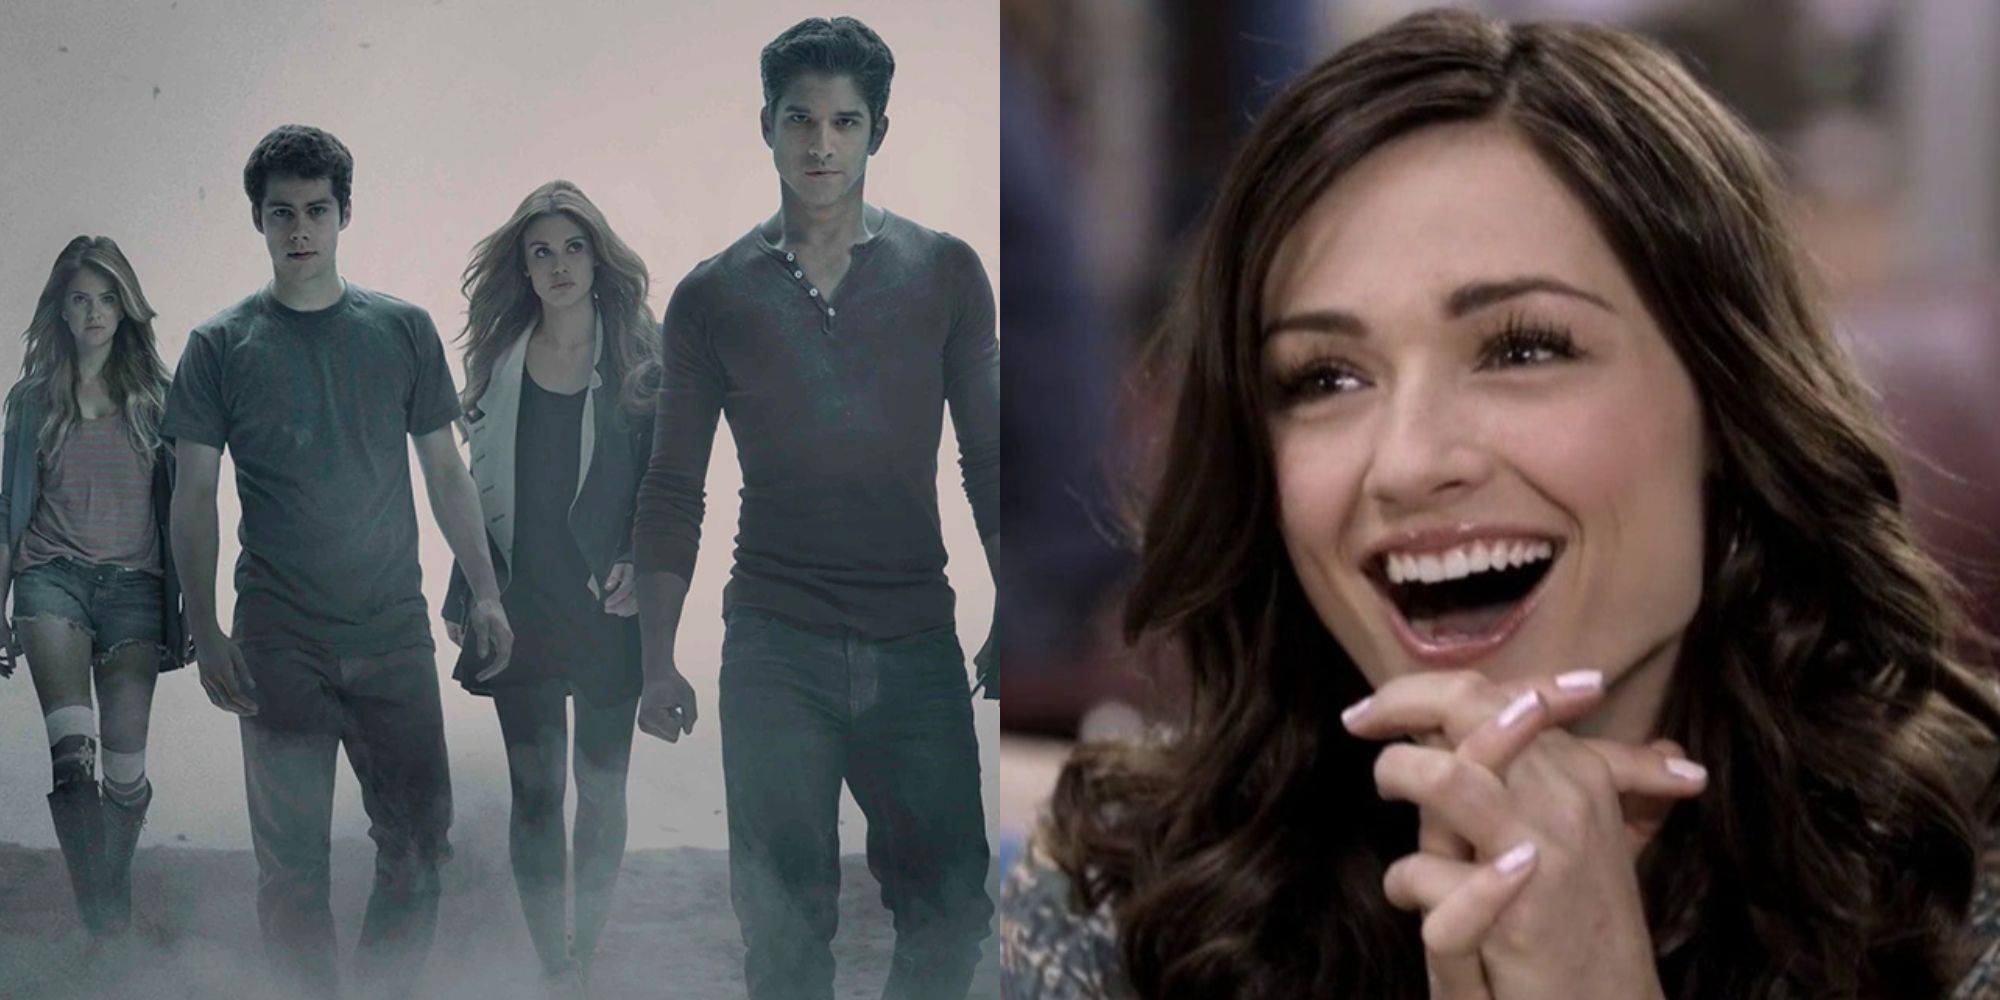 Teen Wolf: 10 Tweets That Perfectly Sum Up The Series